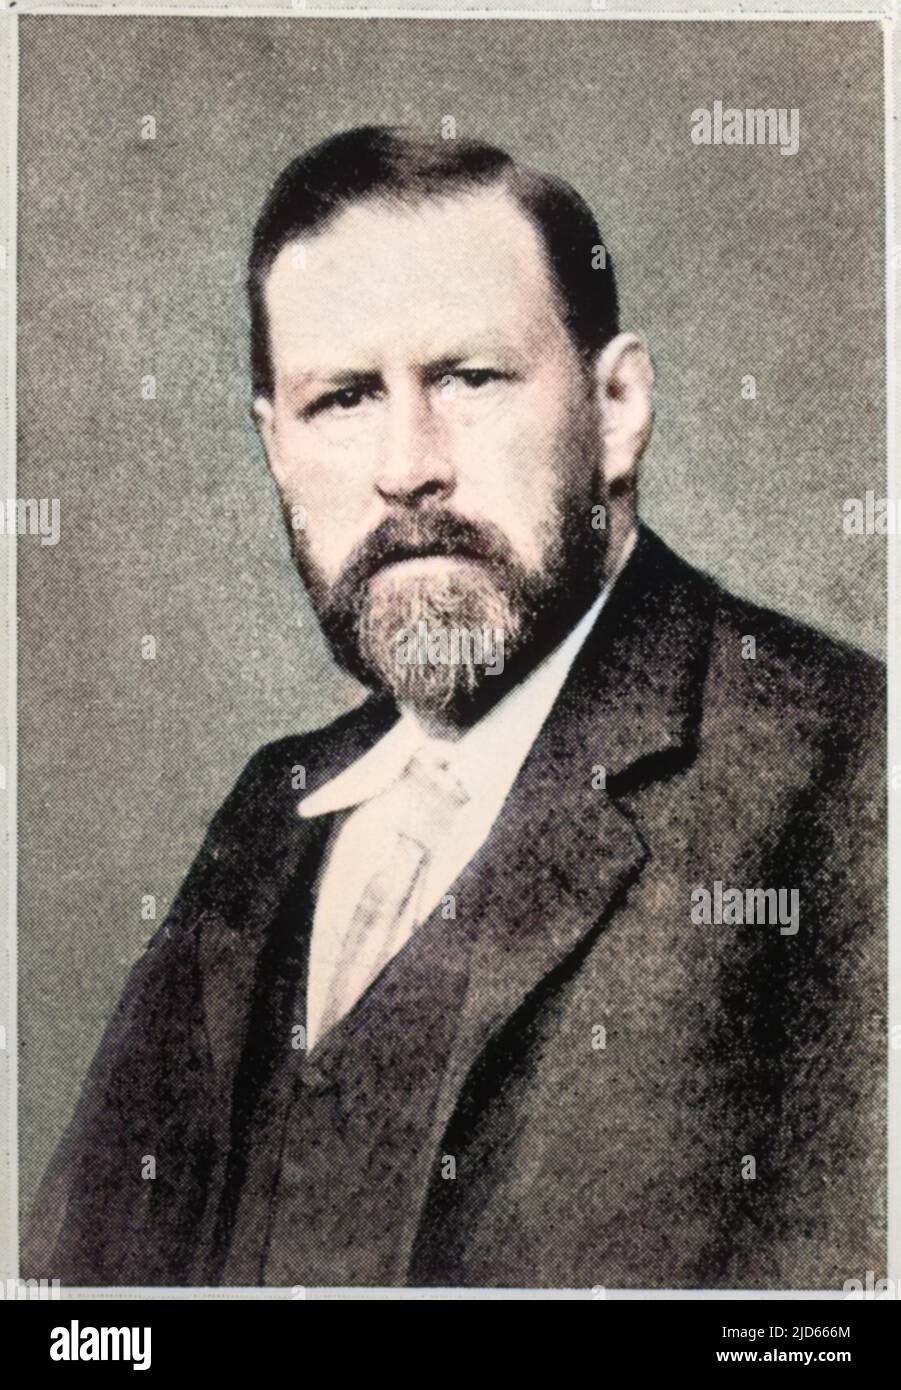 Bram Stoker (1847 - 1912), novelist and short story writer, best known for the gothic novel Dracula (1897). He was also theatre manager for Henry Irving at the Lyceum Theatre, London. Colourised version of : 10005641 Stock Photo